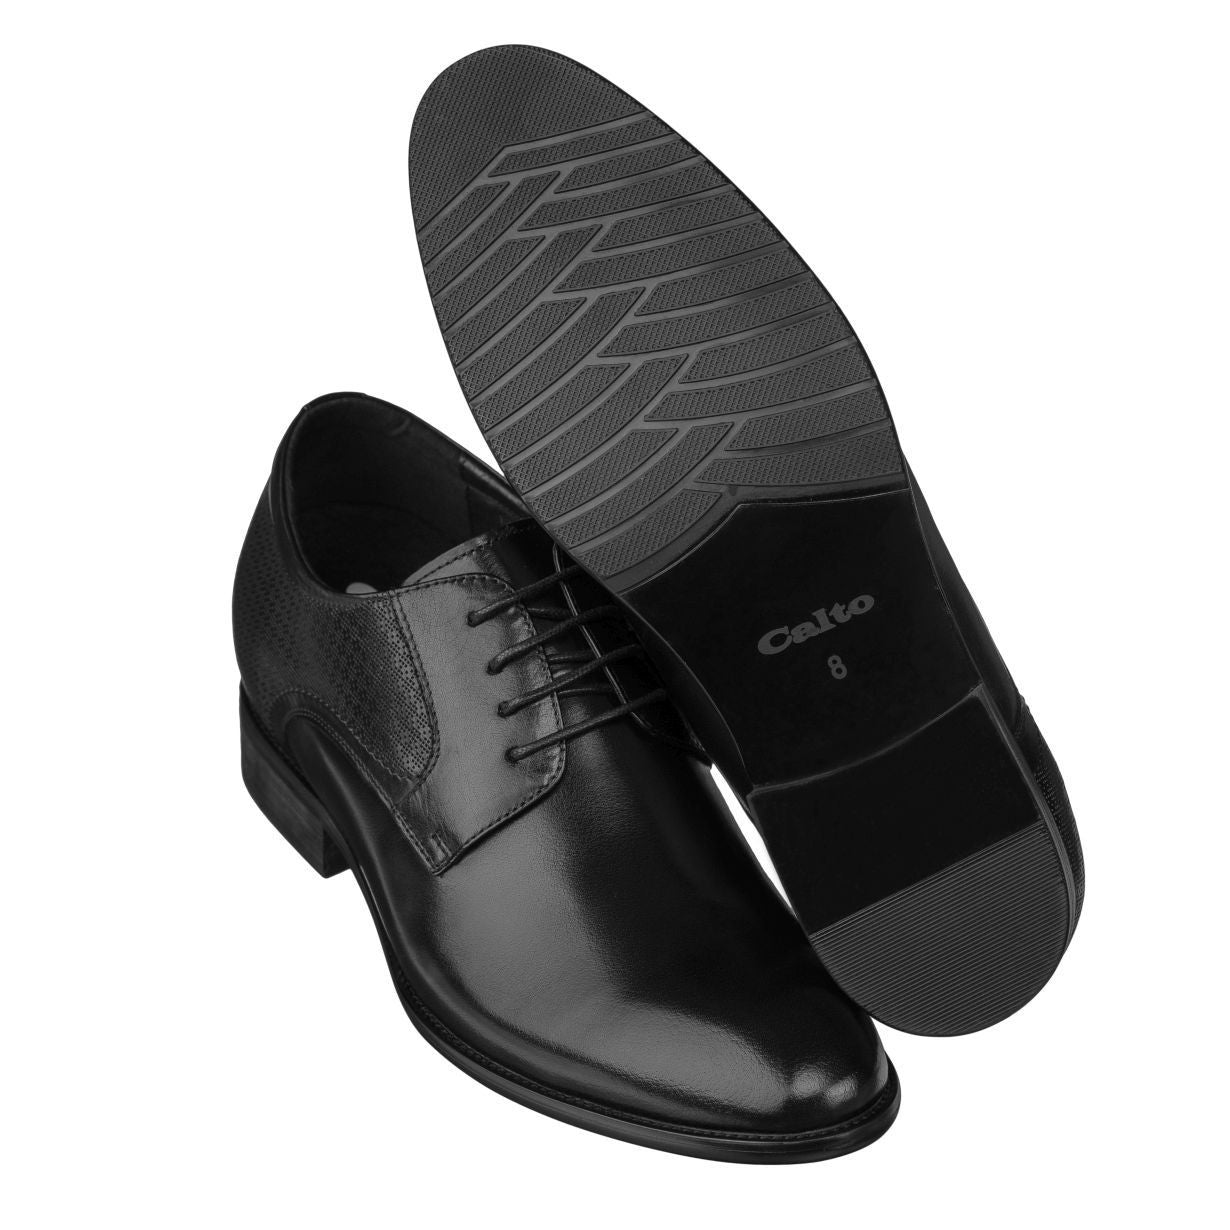 Elevator shoes height increase CALTO - Y1001 - 2.8 Inches Taller (Black)